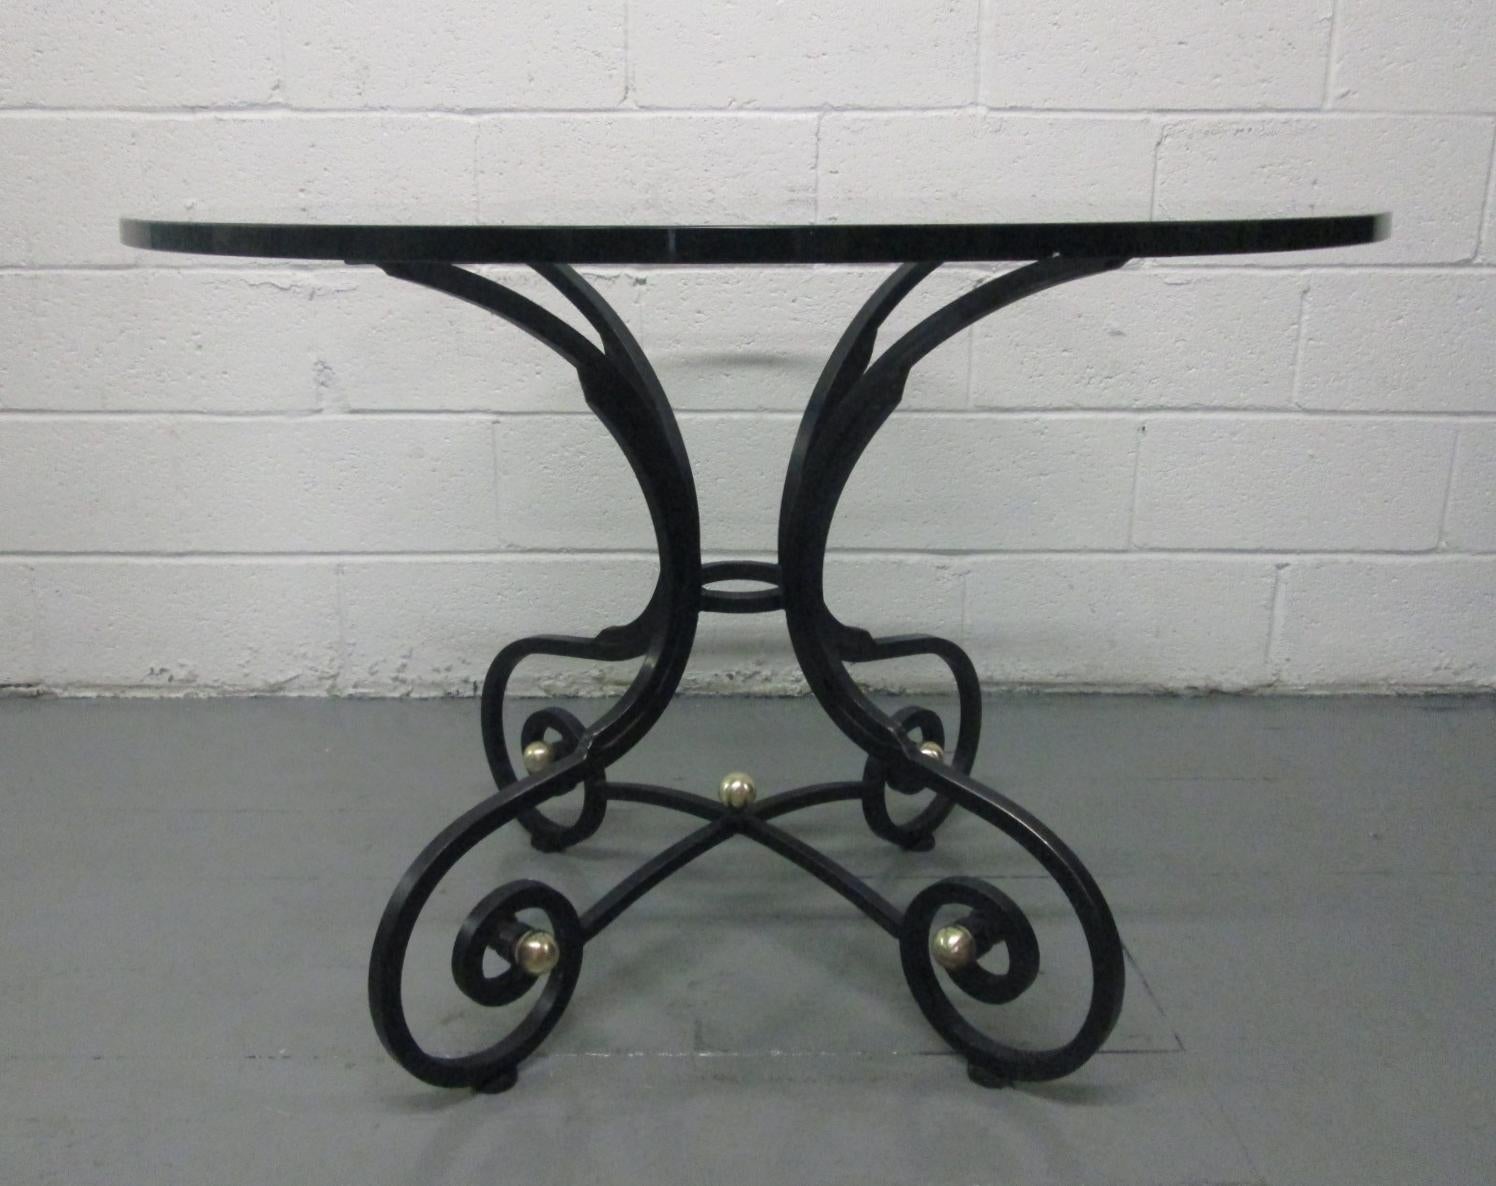 French wrought iron and bronze table or gueridon. The table has bronze round accents and can be used indoor or outdoors.
Would also make a nice dining, center table or occasional table.